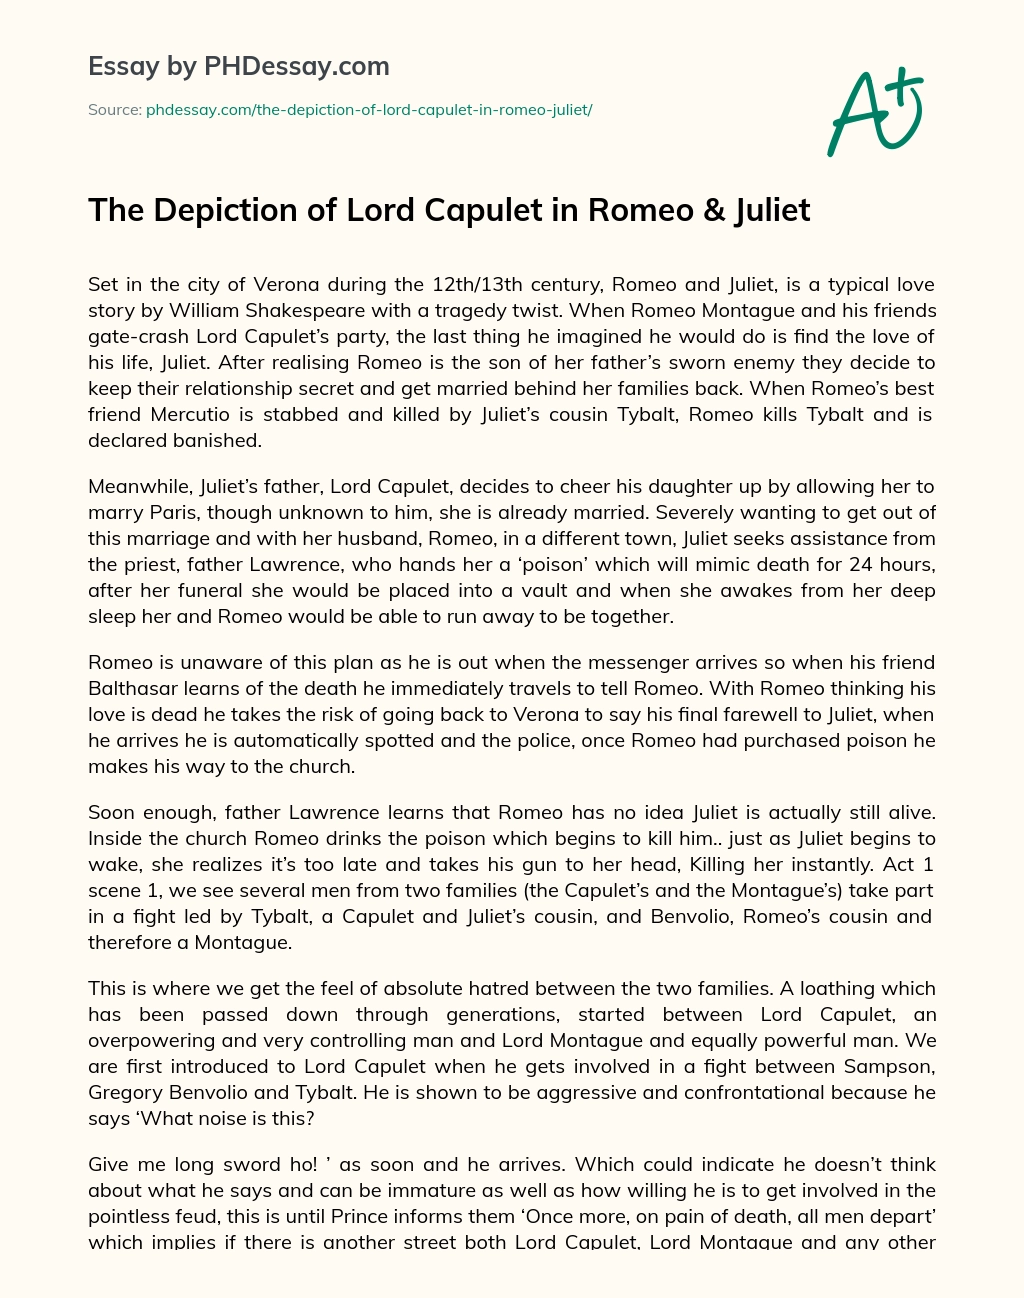 The Depiction of Lord Capulet in Romeo & Juliet essay